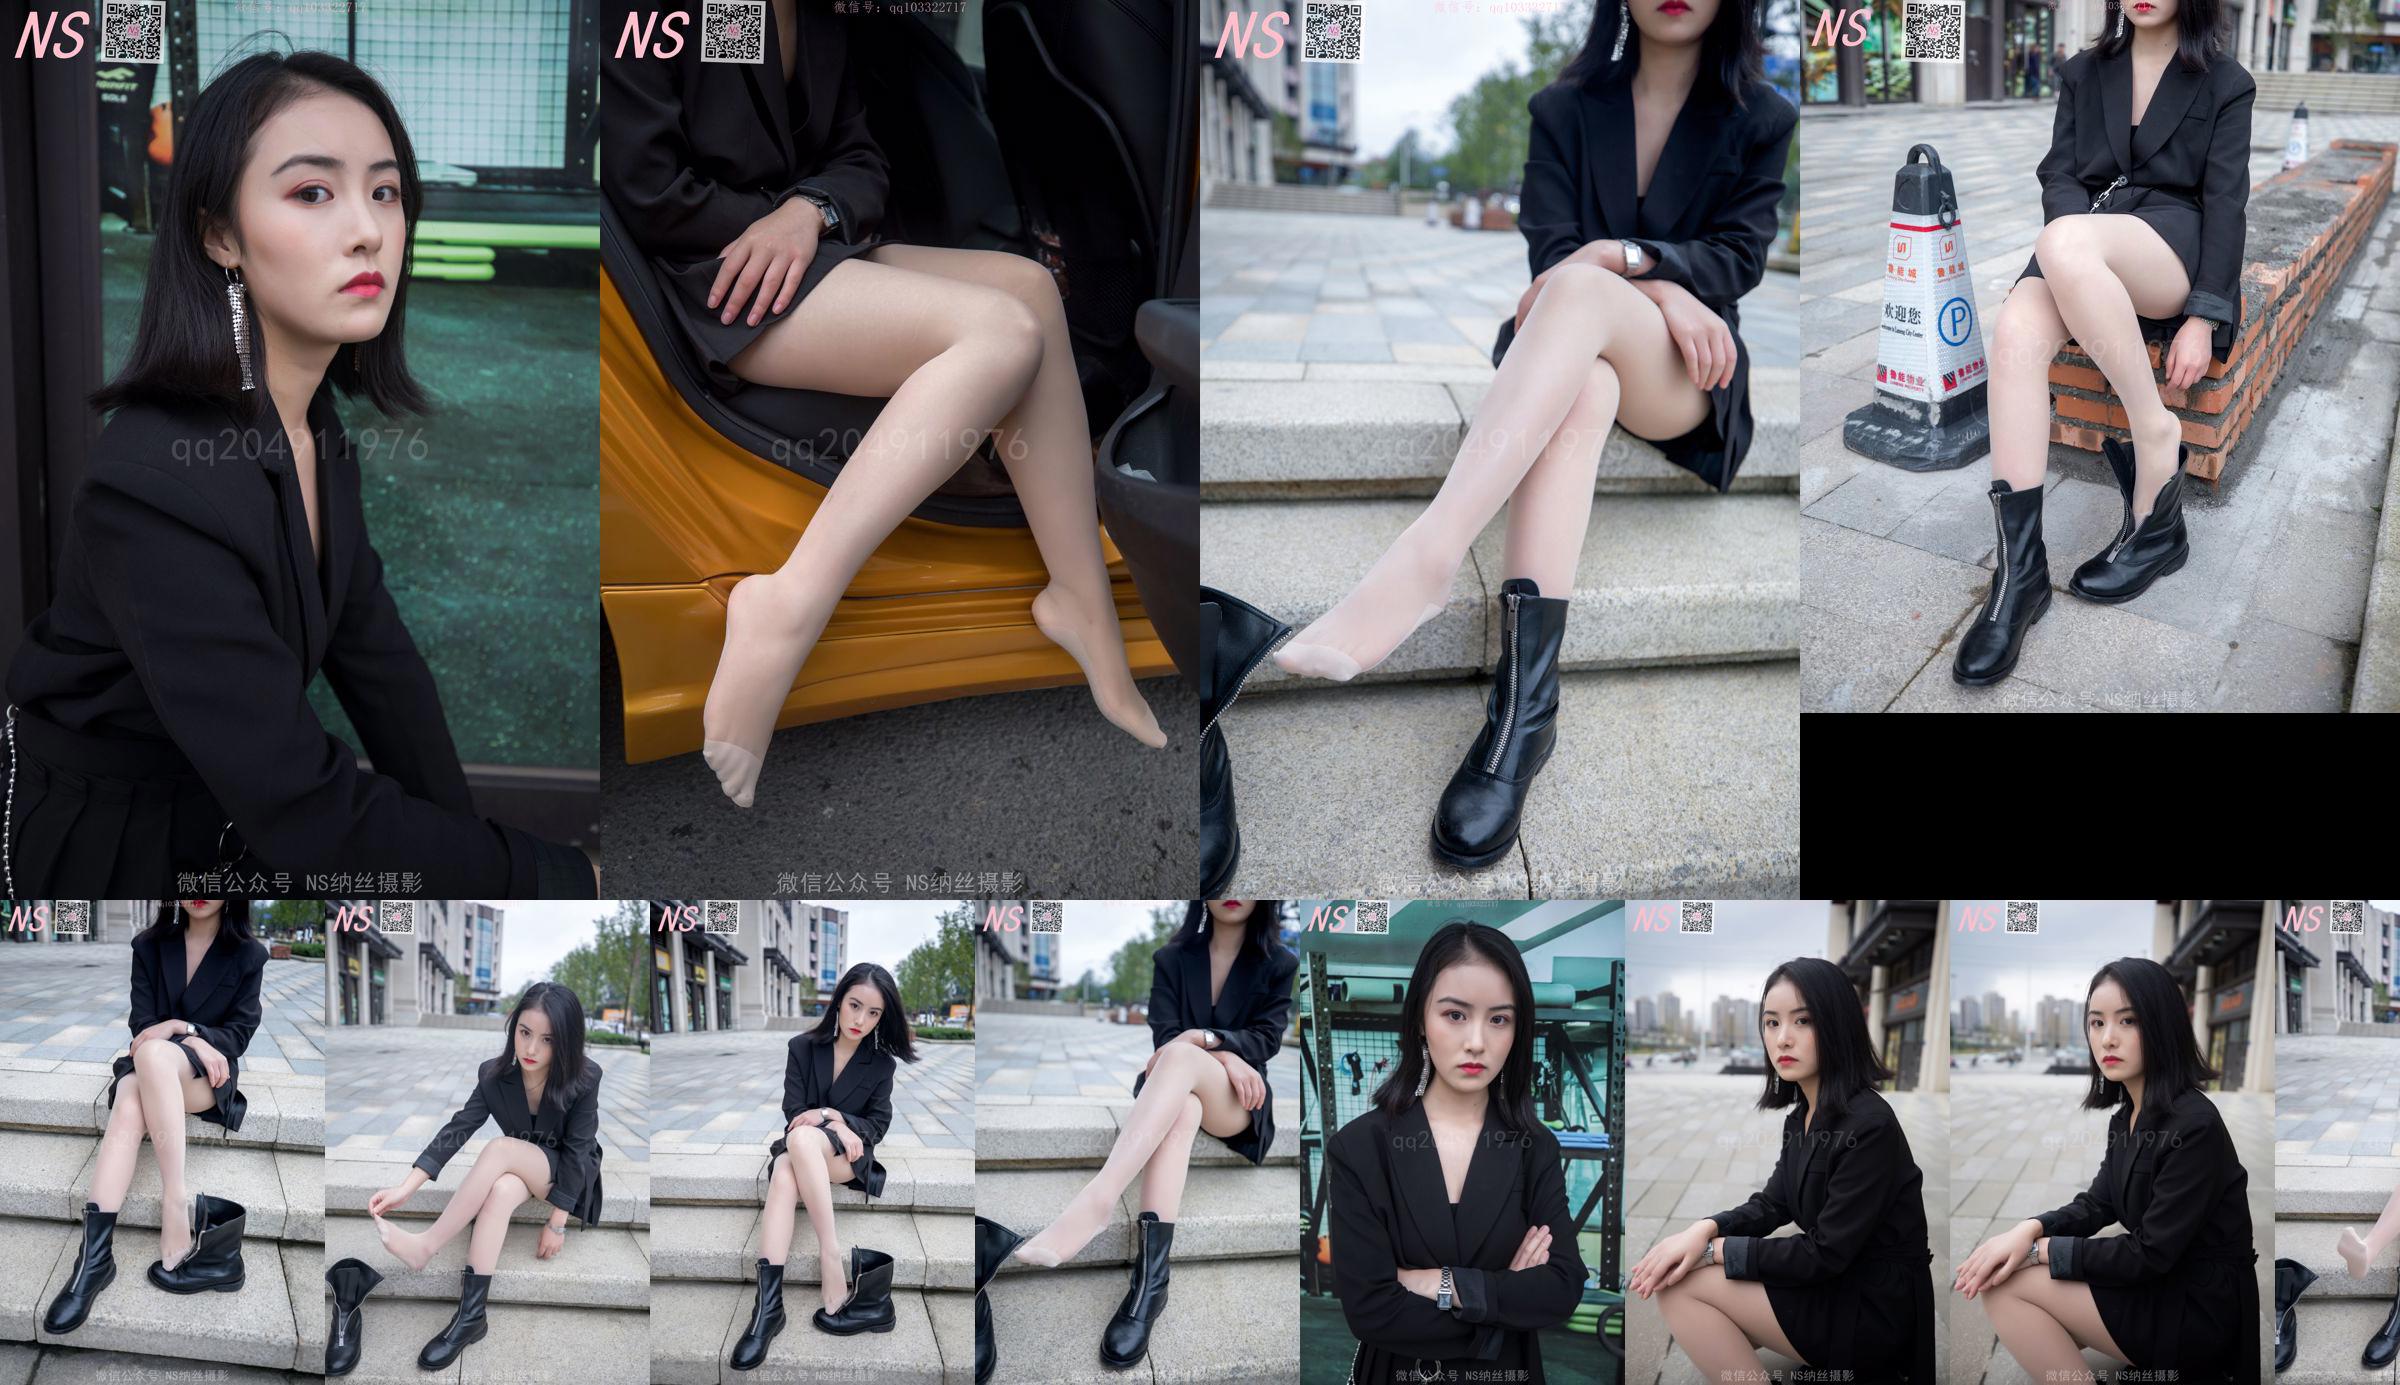 Yishuang "Special Wonderful Boots and Stockings" [Nass Photography] No.a56253 Page 1